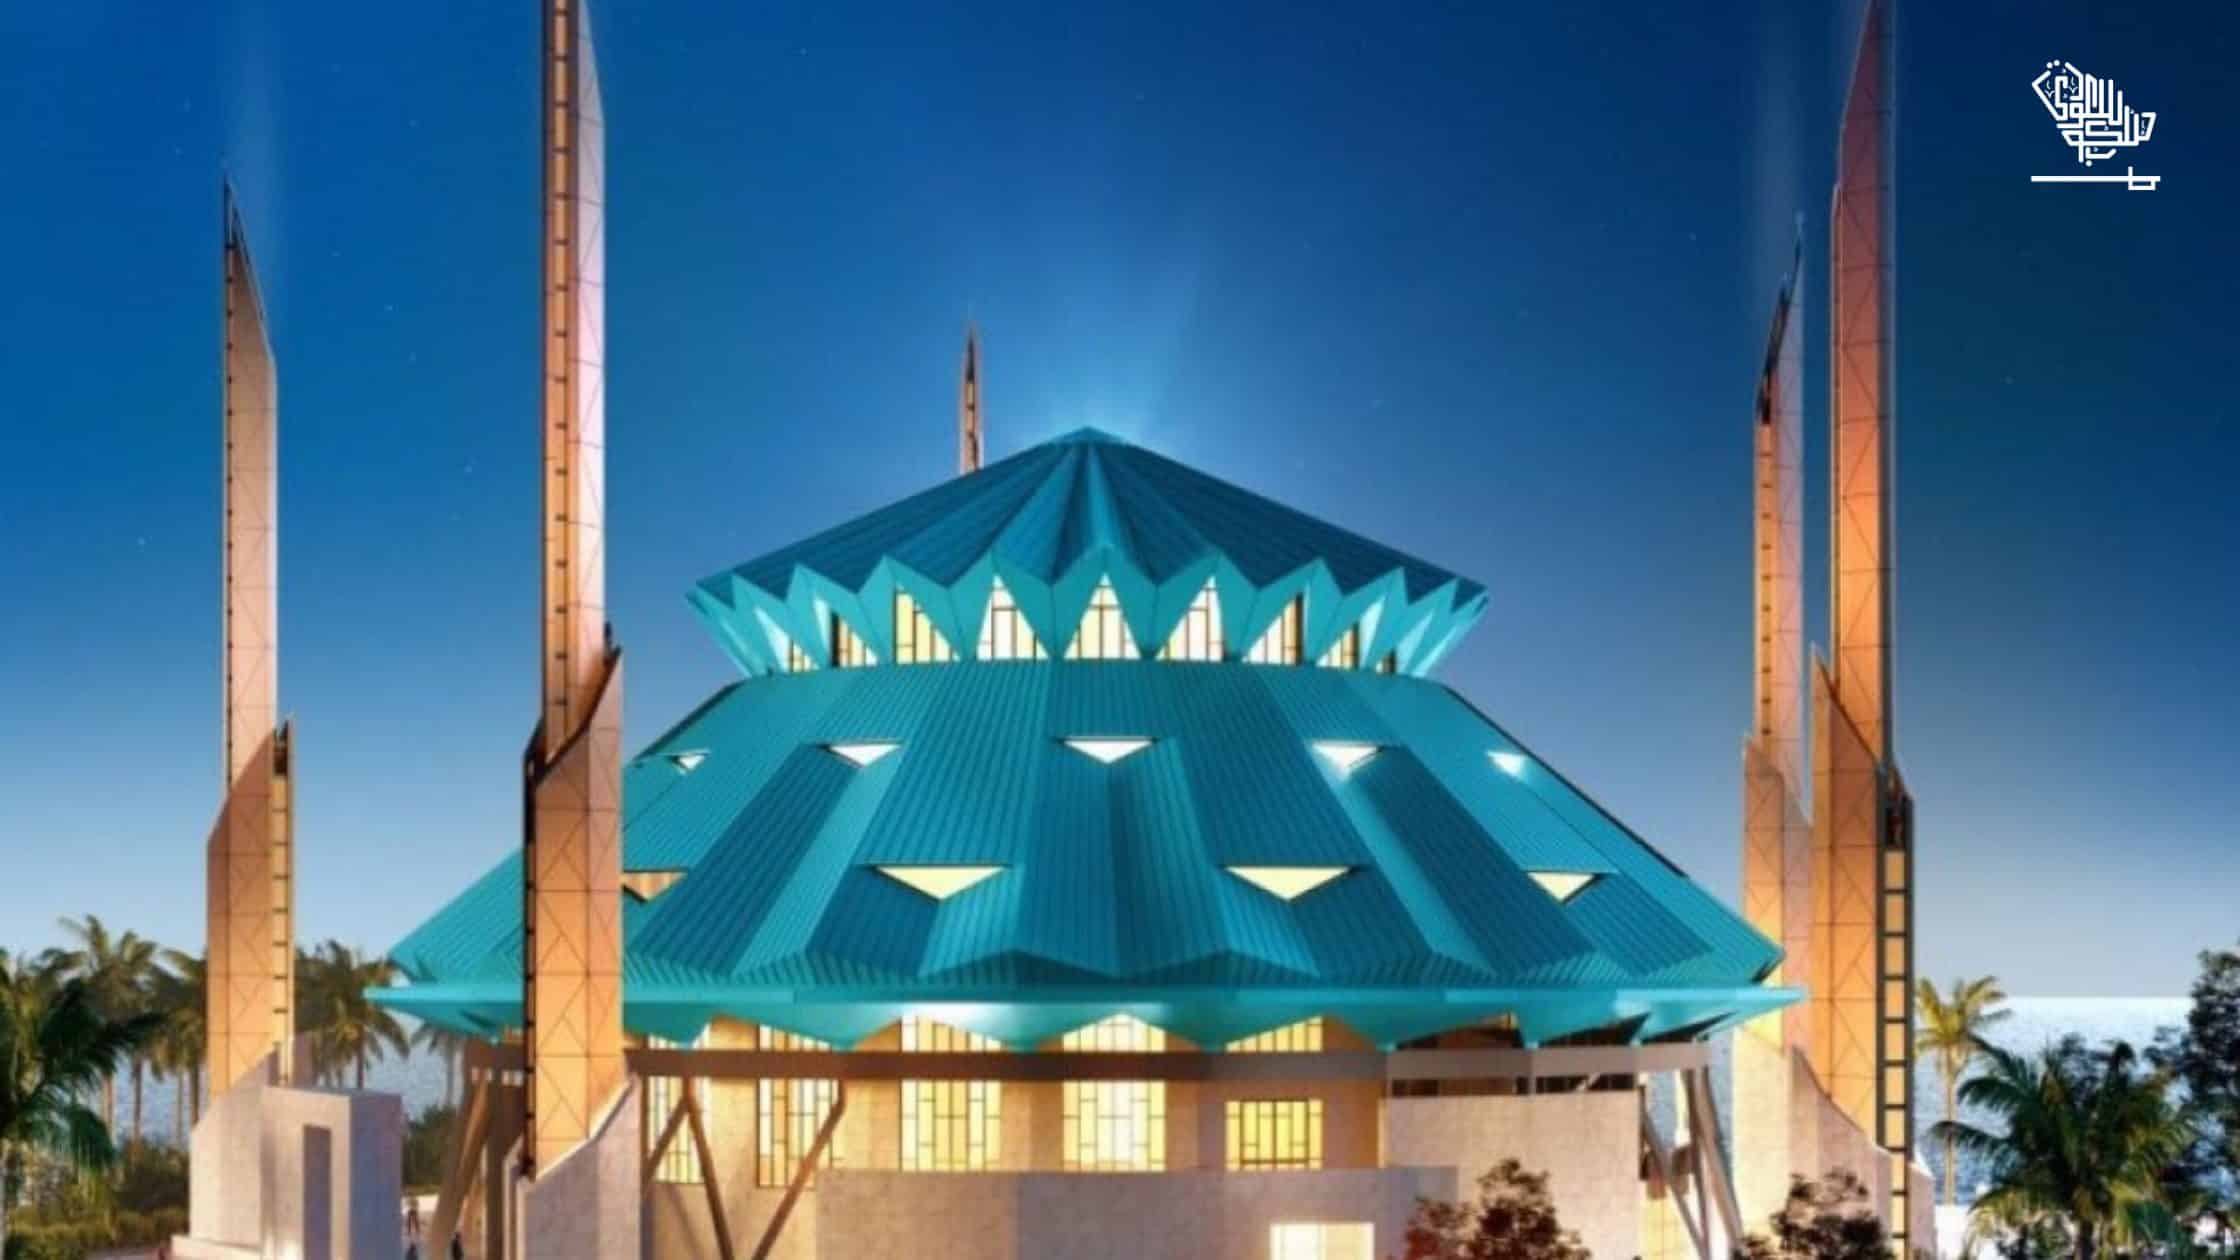 The largest mosque in Maldives largest named after King Salman is set to open soon.